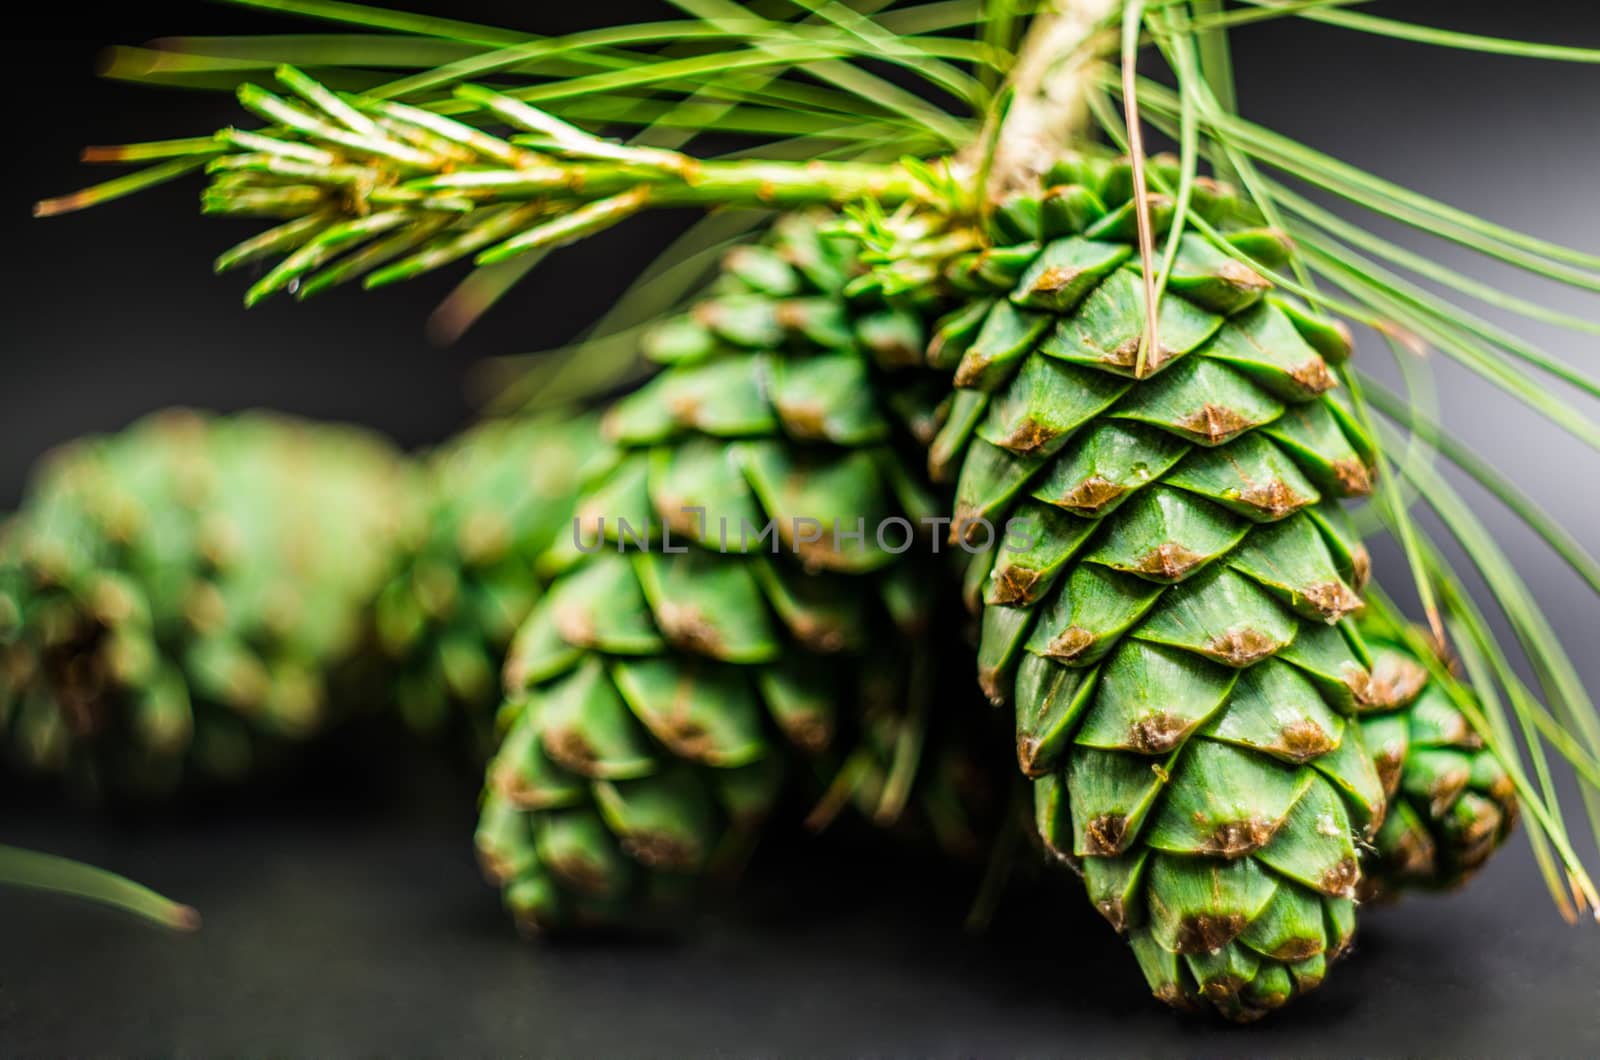 green fir cones on the black background